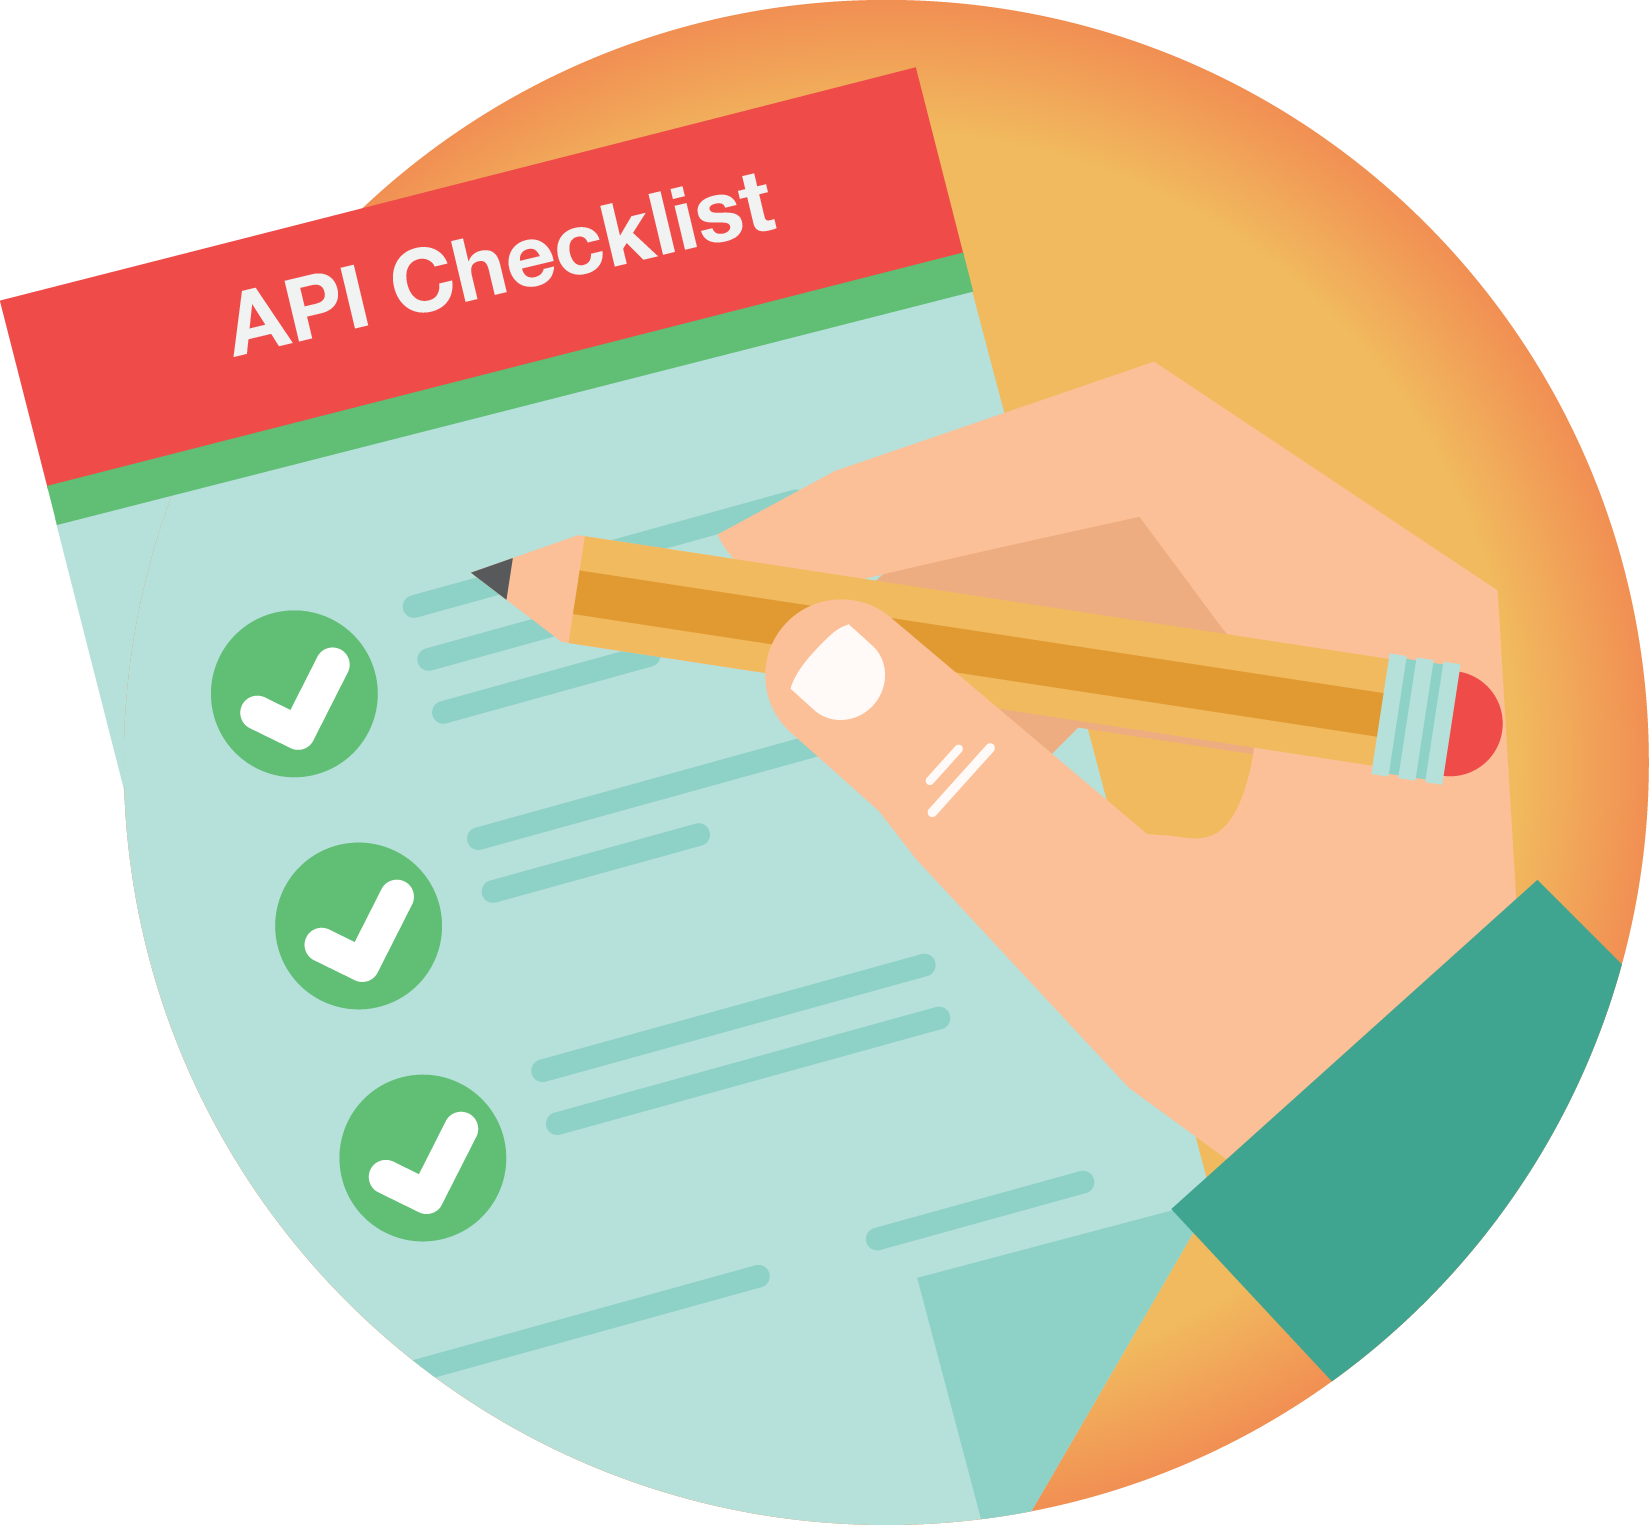 Using the API is simple to get started and maintain